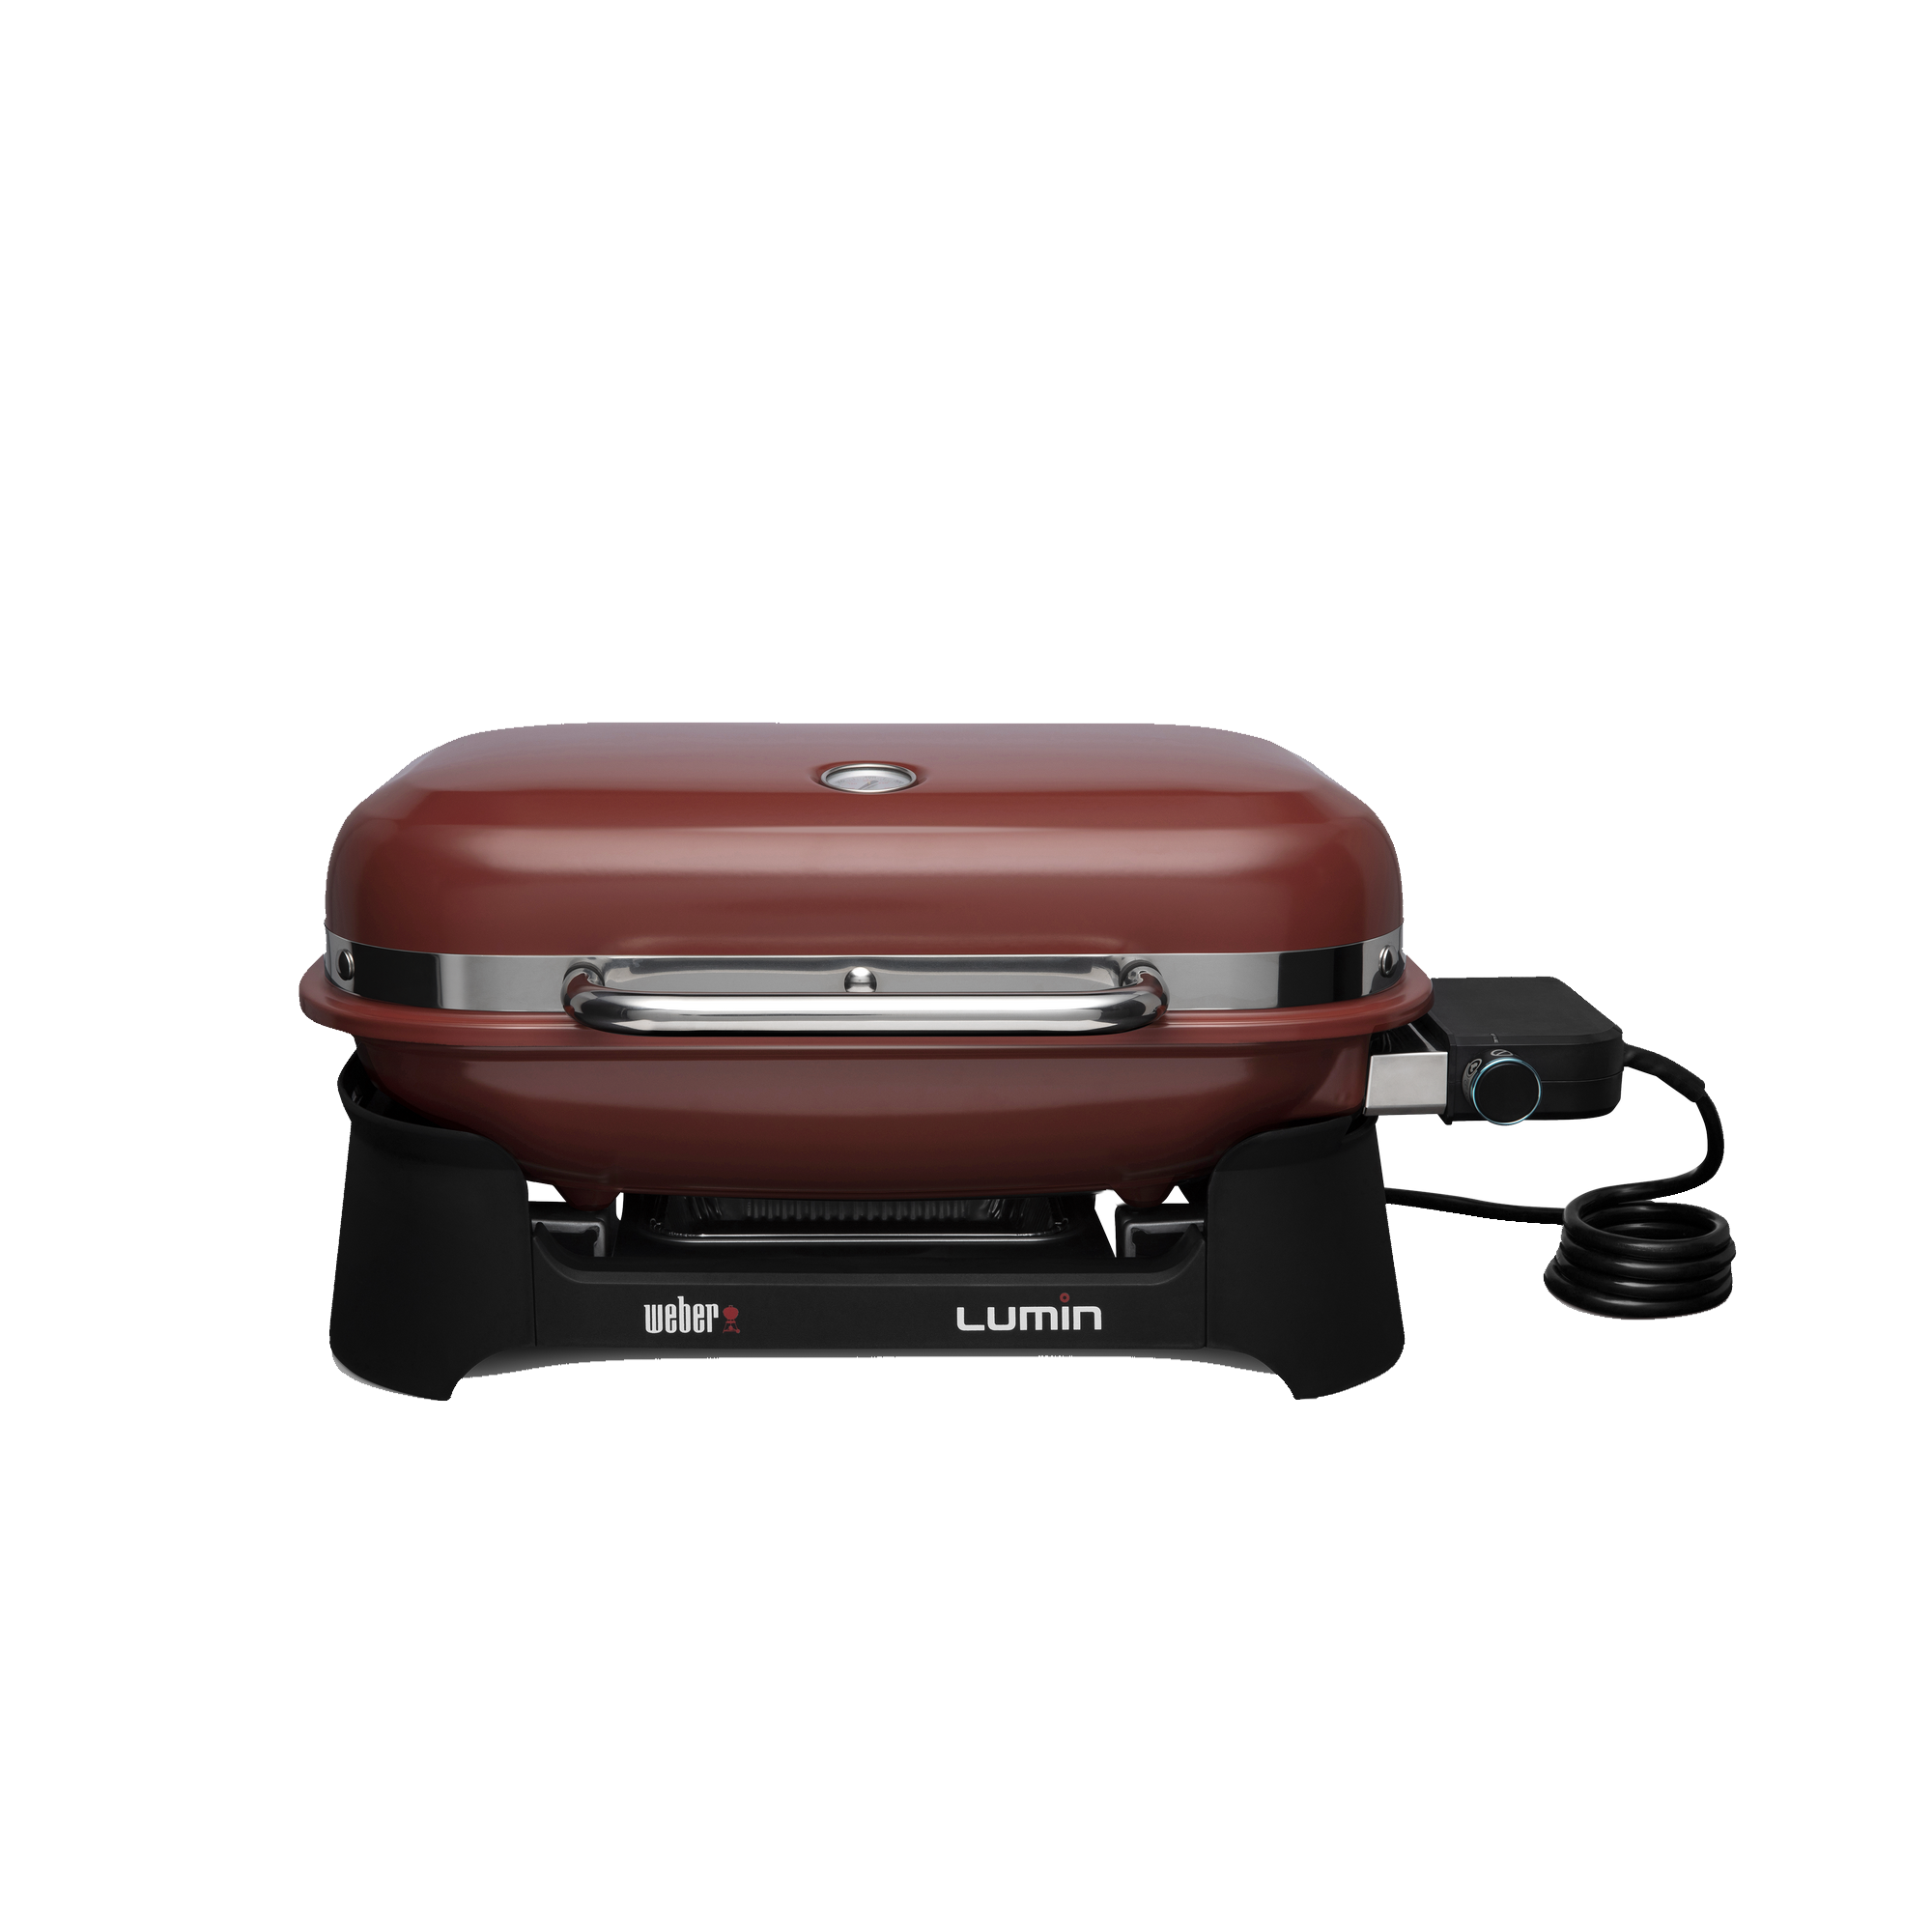 Elektrogrill 'Lumin' rot 2200 W + product picture